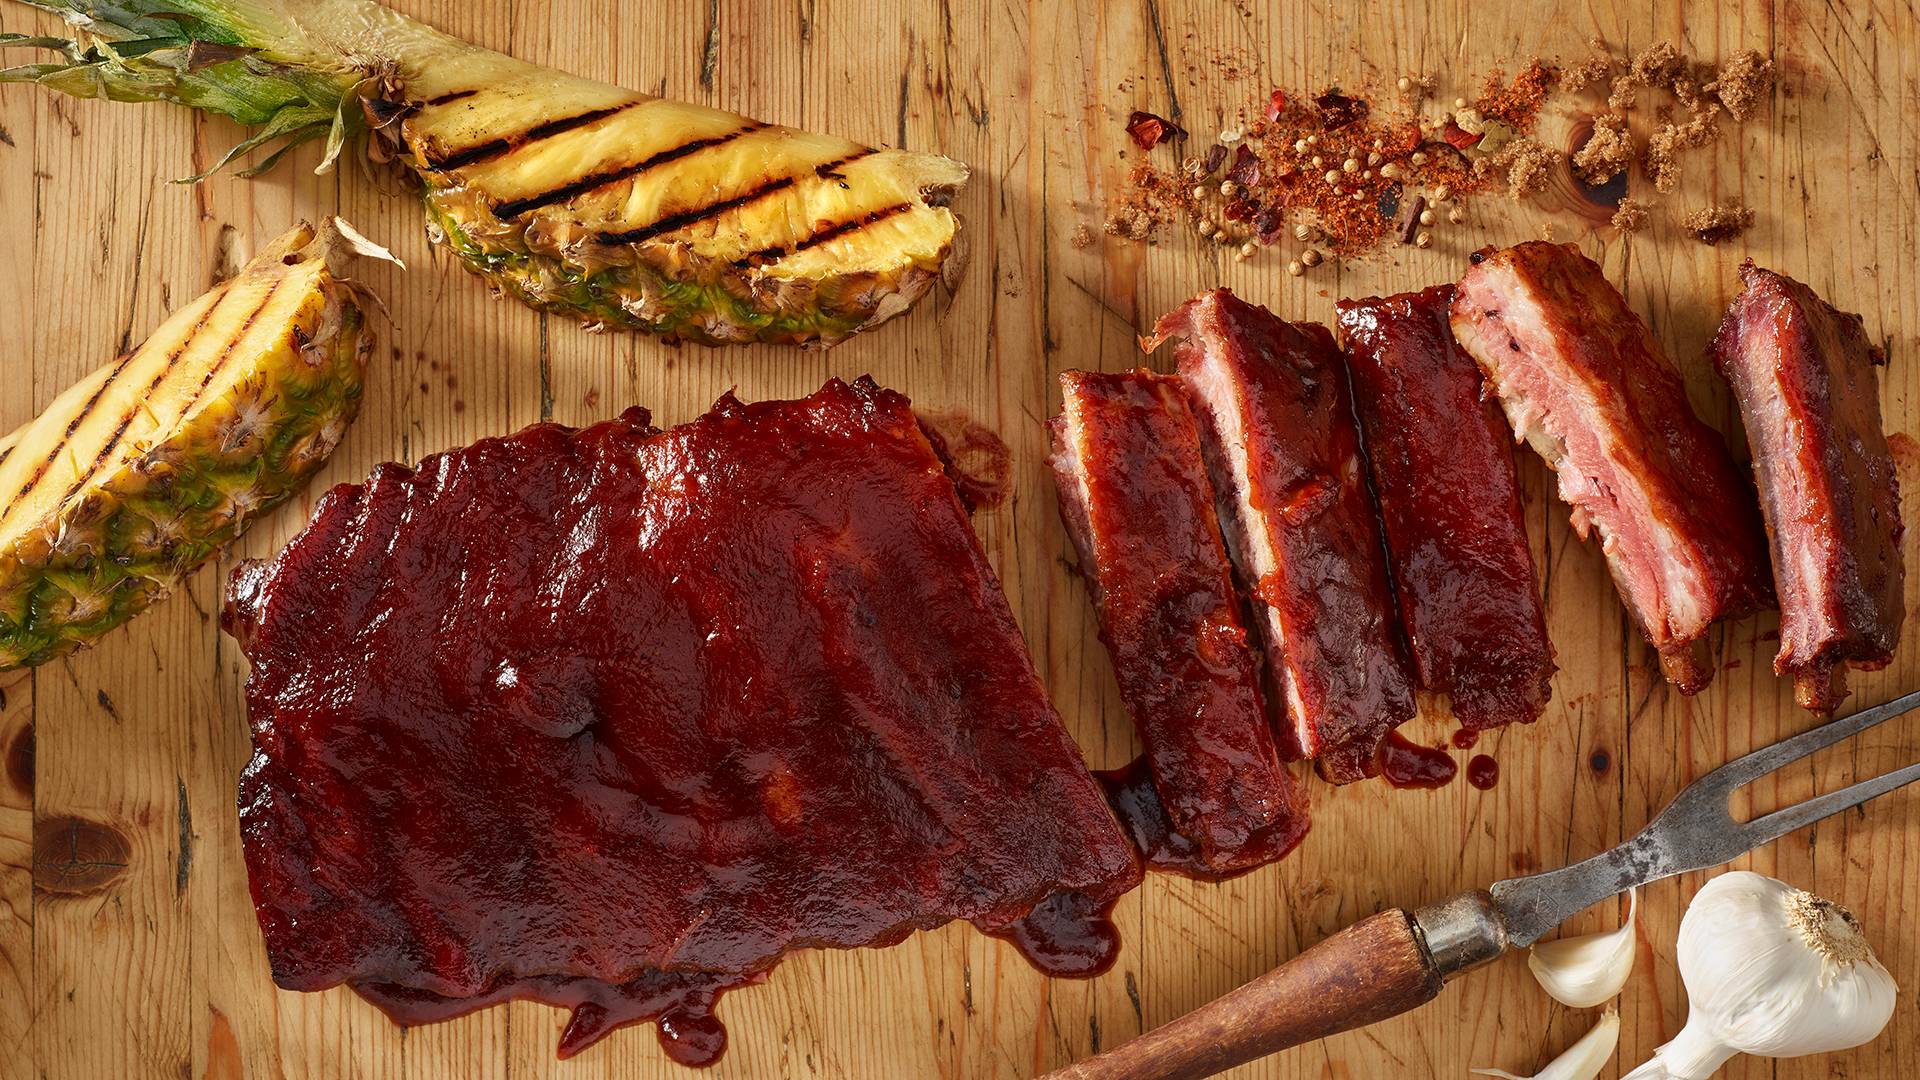 Sauced Ribs on a butcher block